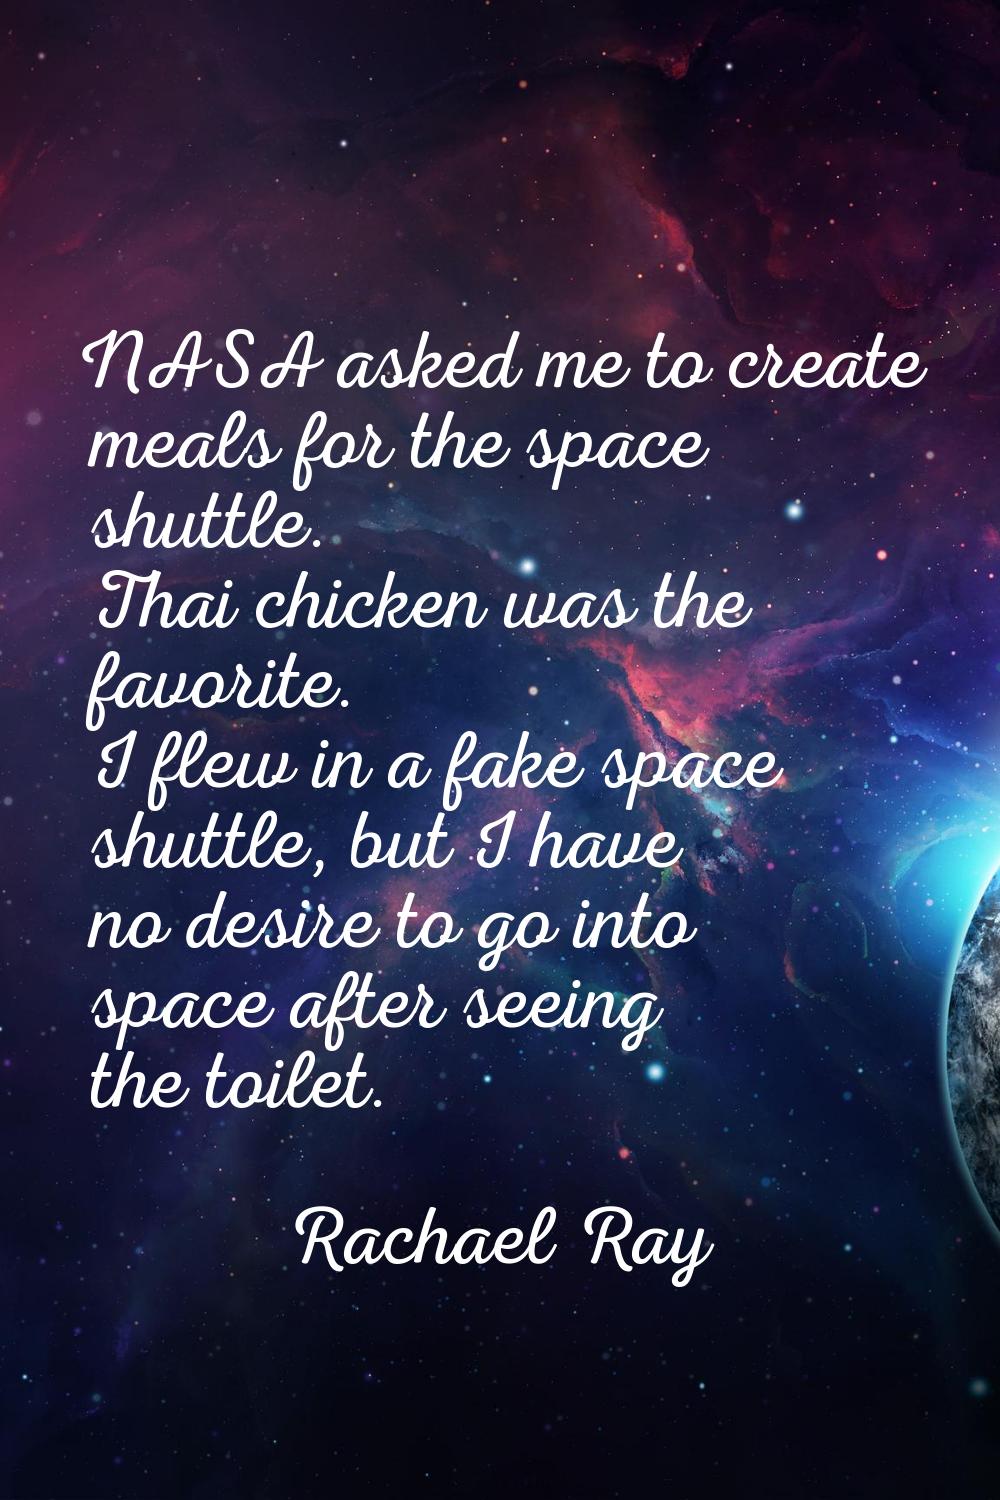 NASA asked me to create meals for the space shuttle. Thai chicken was the favorite. I flew in a fak